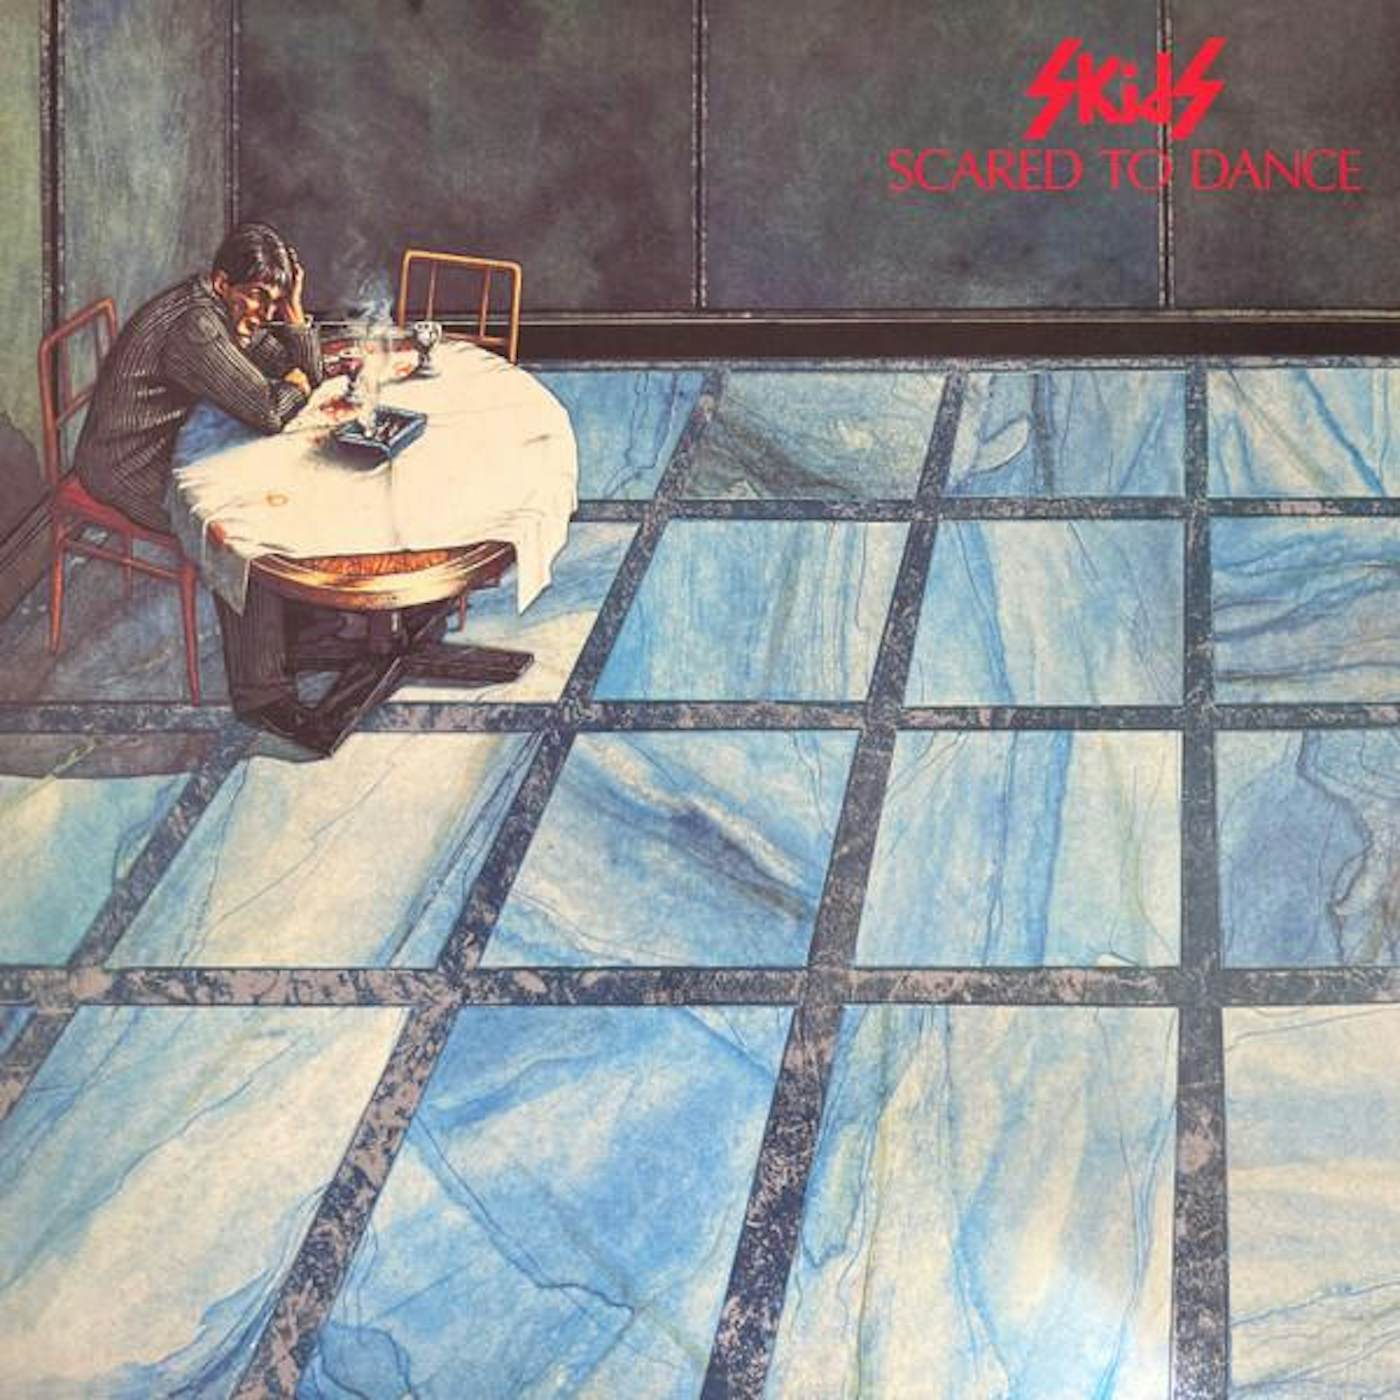 Skids Scared To Dance (Red Vinyl Record/2lp) (I) 